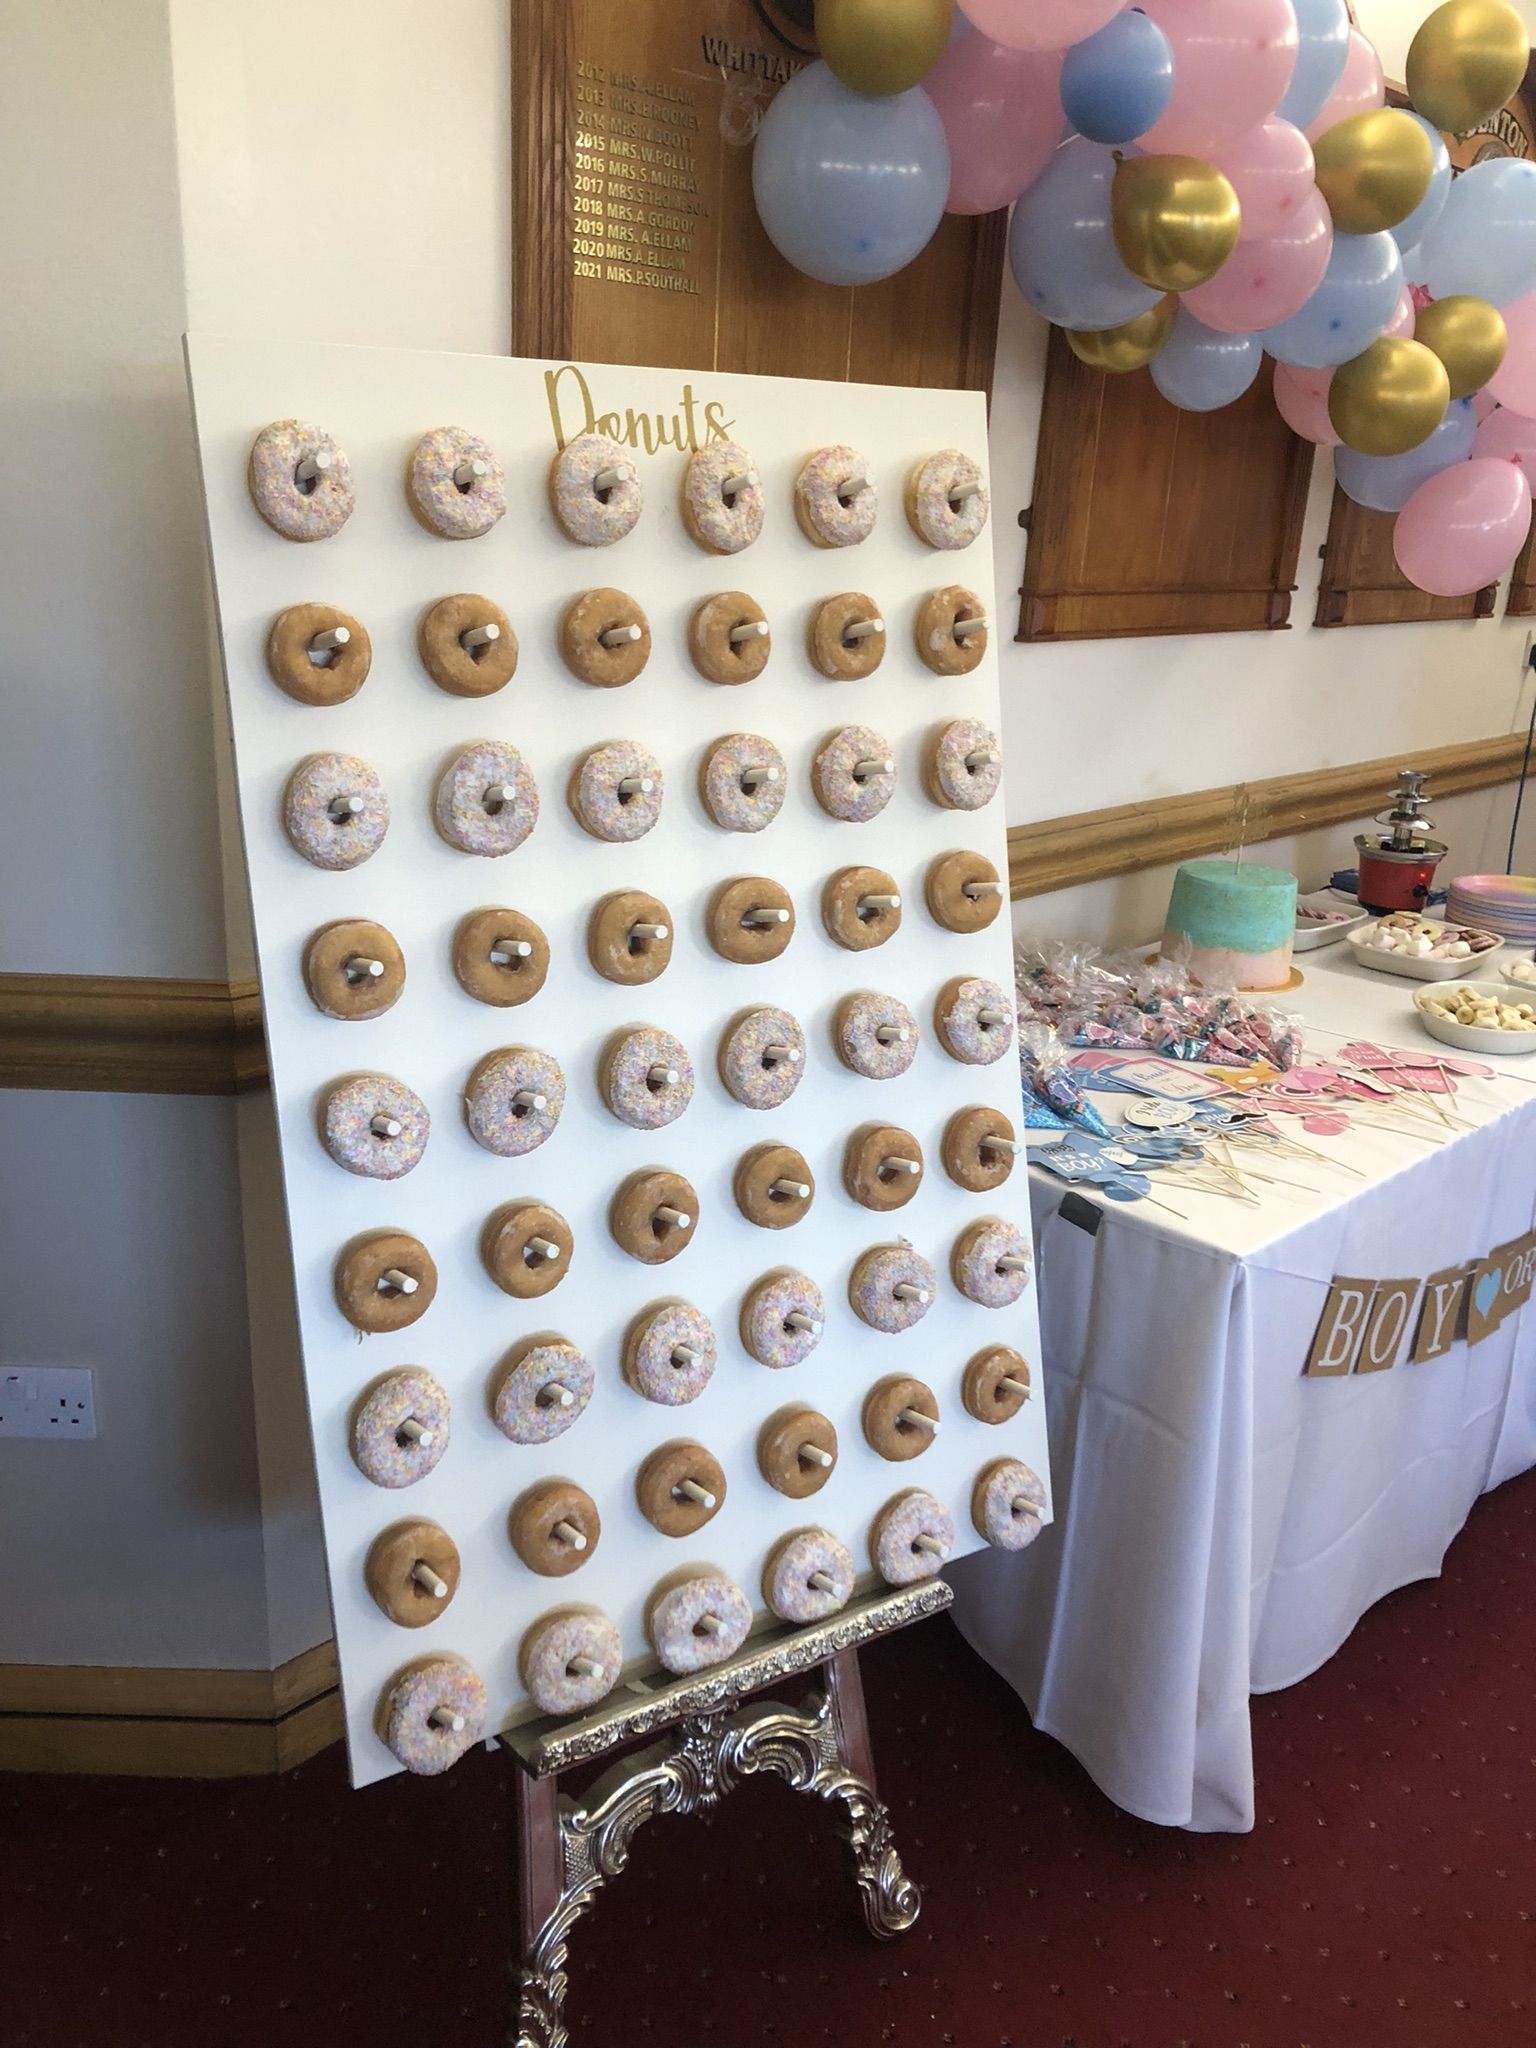 a display of doughnuts on a white board.